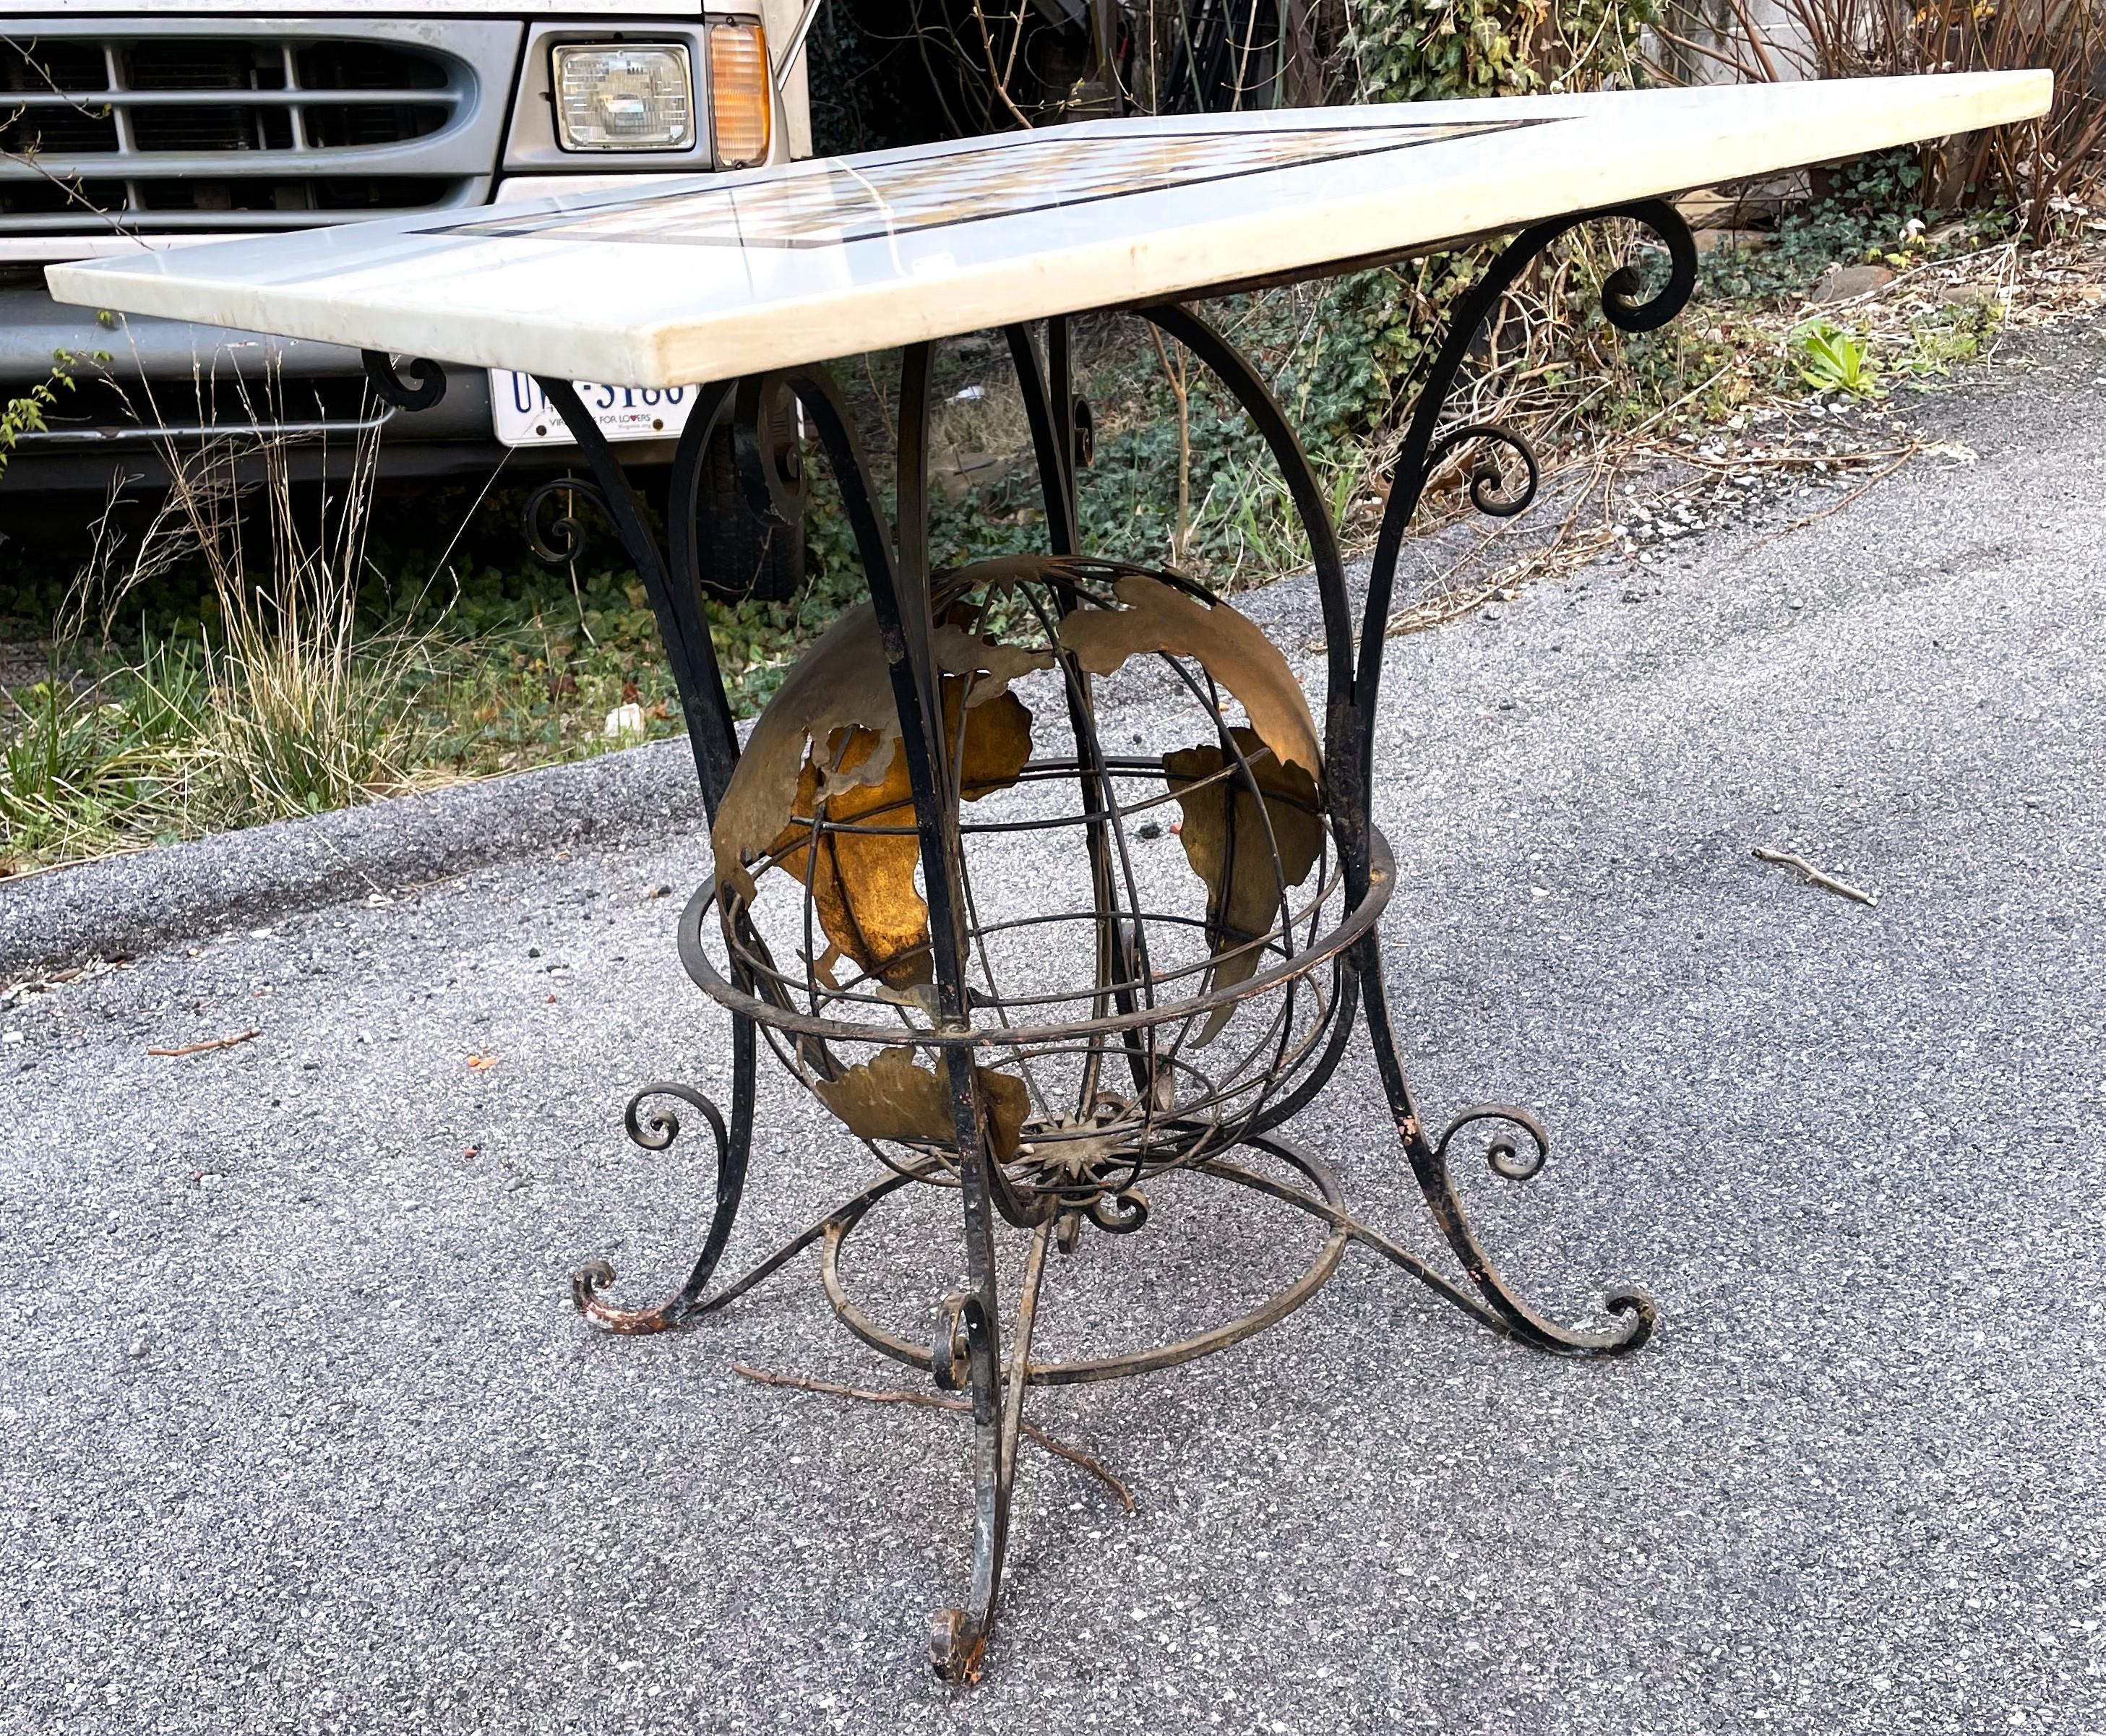 What a fabulous Iron based game table with a world globe in the center of the base. The metal work is fantastic with heavy gage iron and flattened, gold painted pieces forming the continents. The top is a 30 inch by 30 inch square of white marble